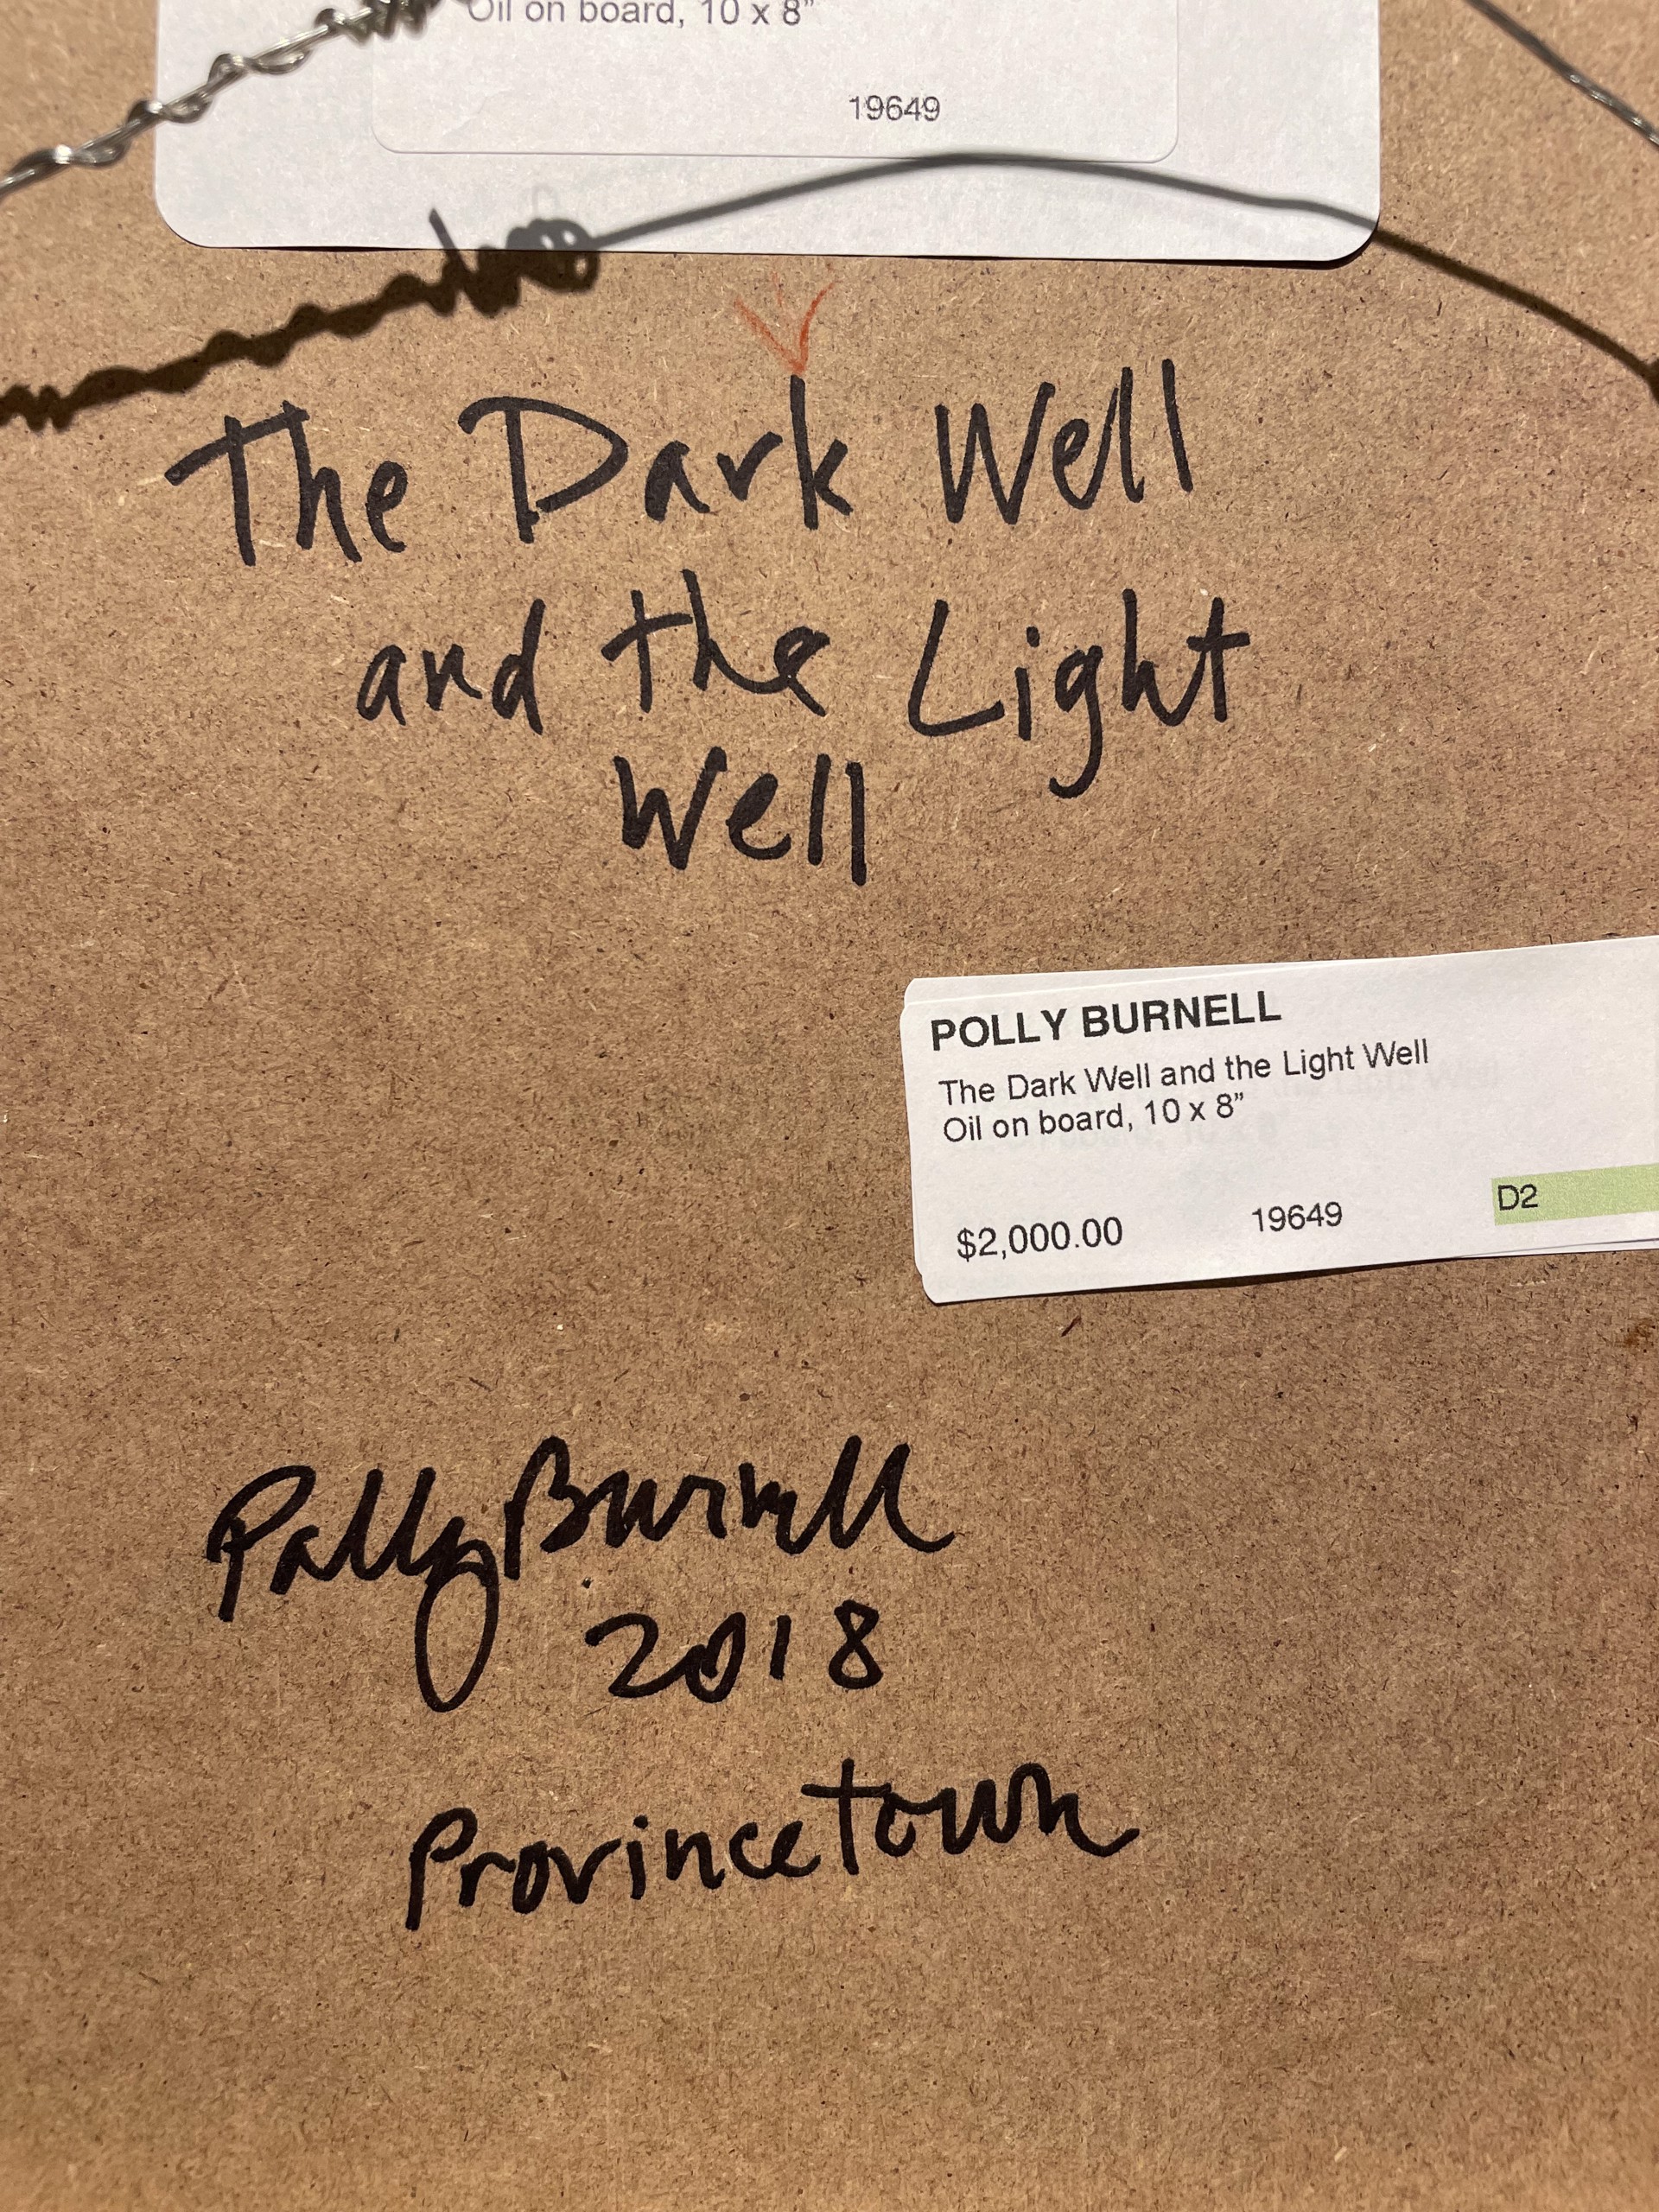 The Dark Well and the Light Well by Polly Burnell